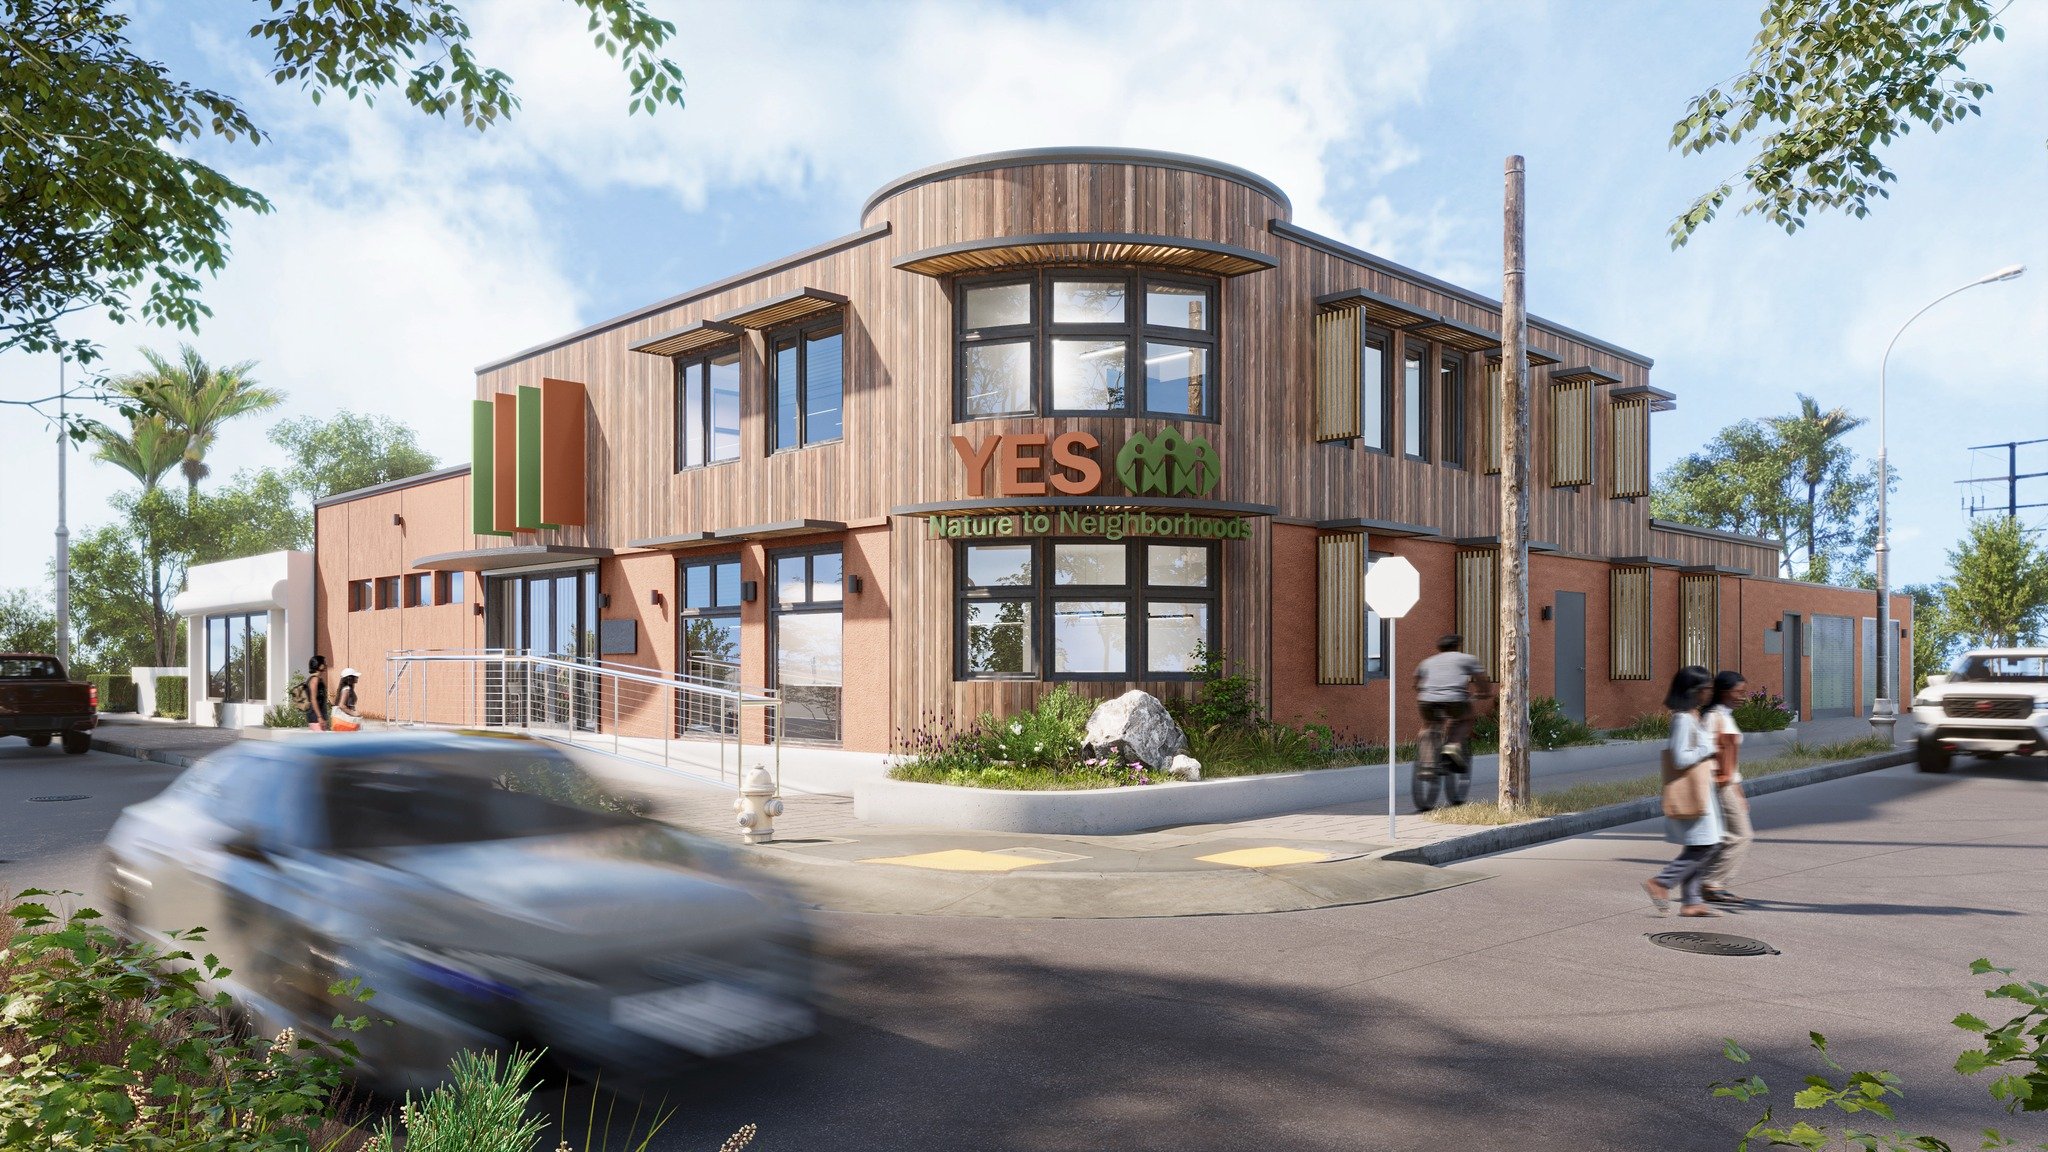 The good news is out that big changes are coming!

We are so excited to officially announce our plans to construct a brand new community center at our 3029 Macdonald Avenue home. When the opportunity presented itself in 2021 for YES to purchase our o